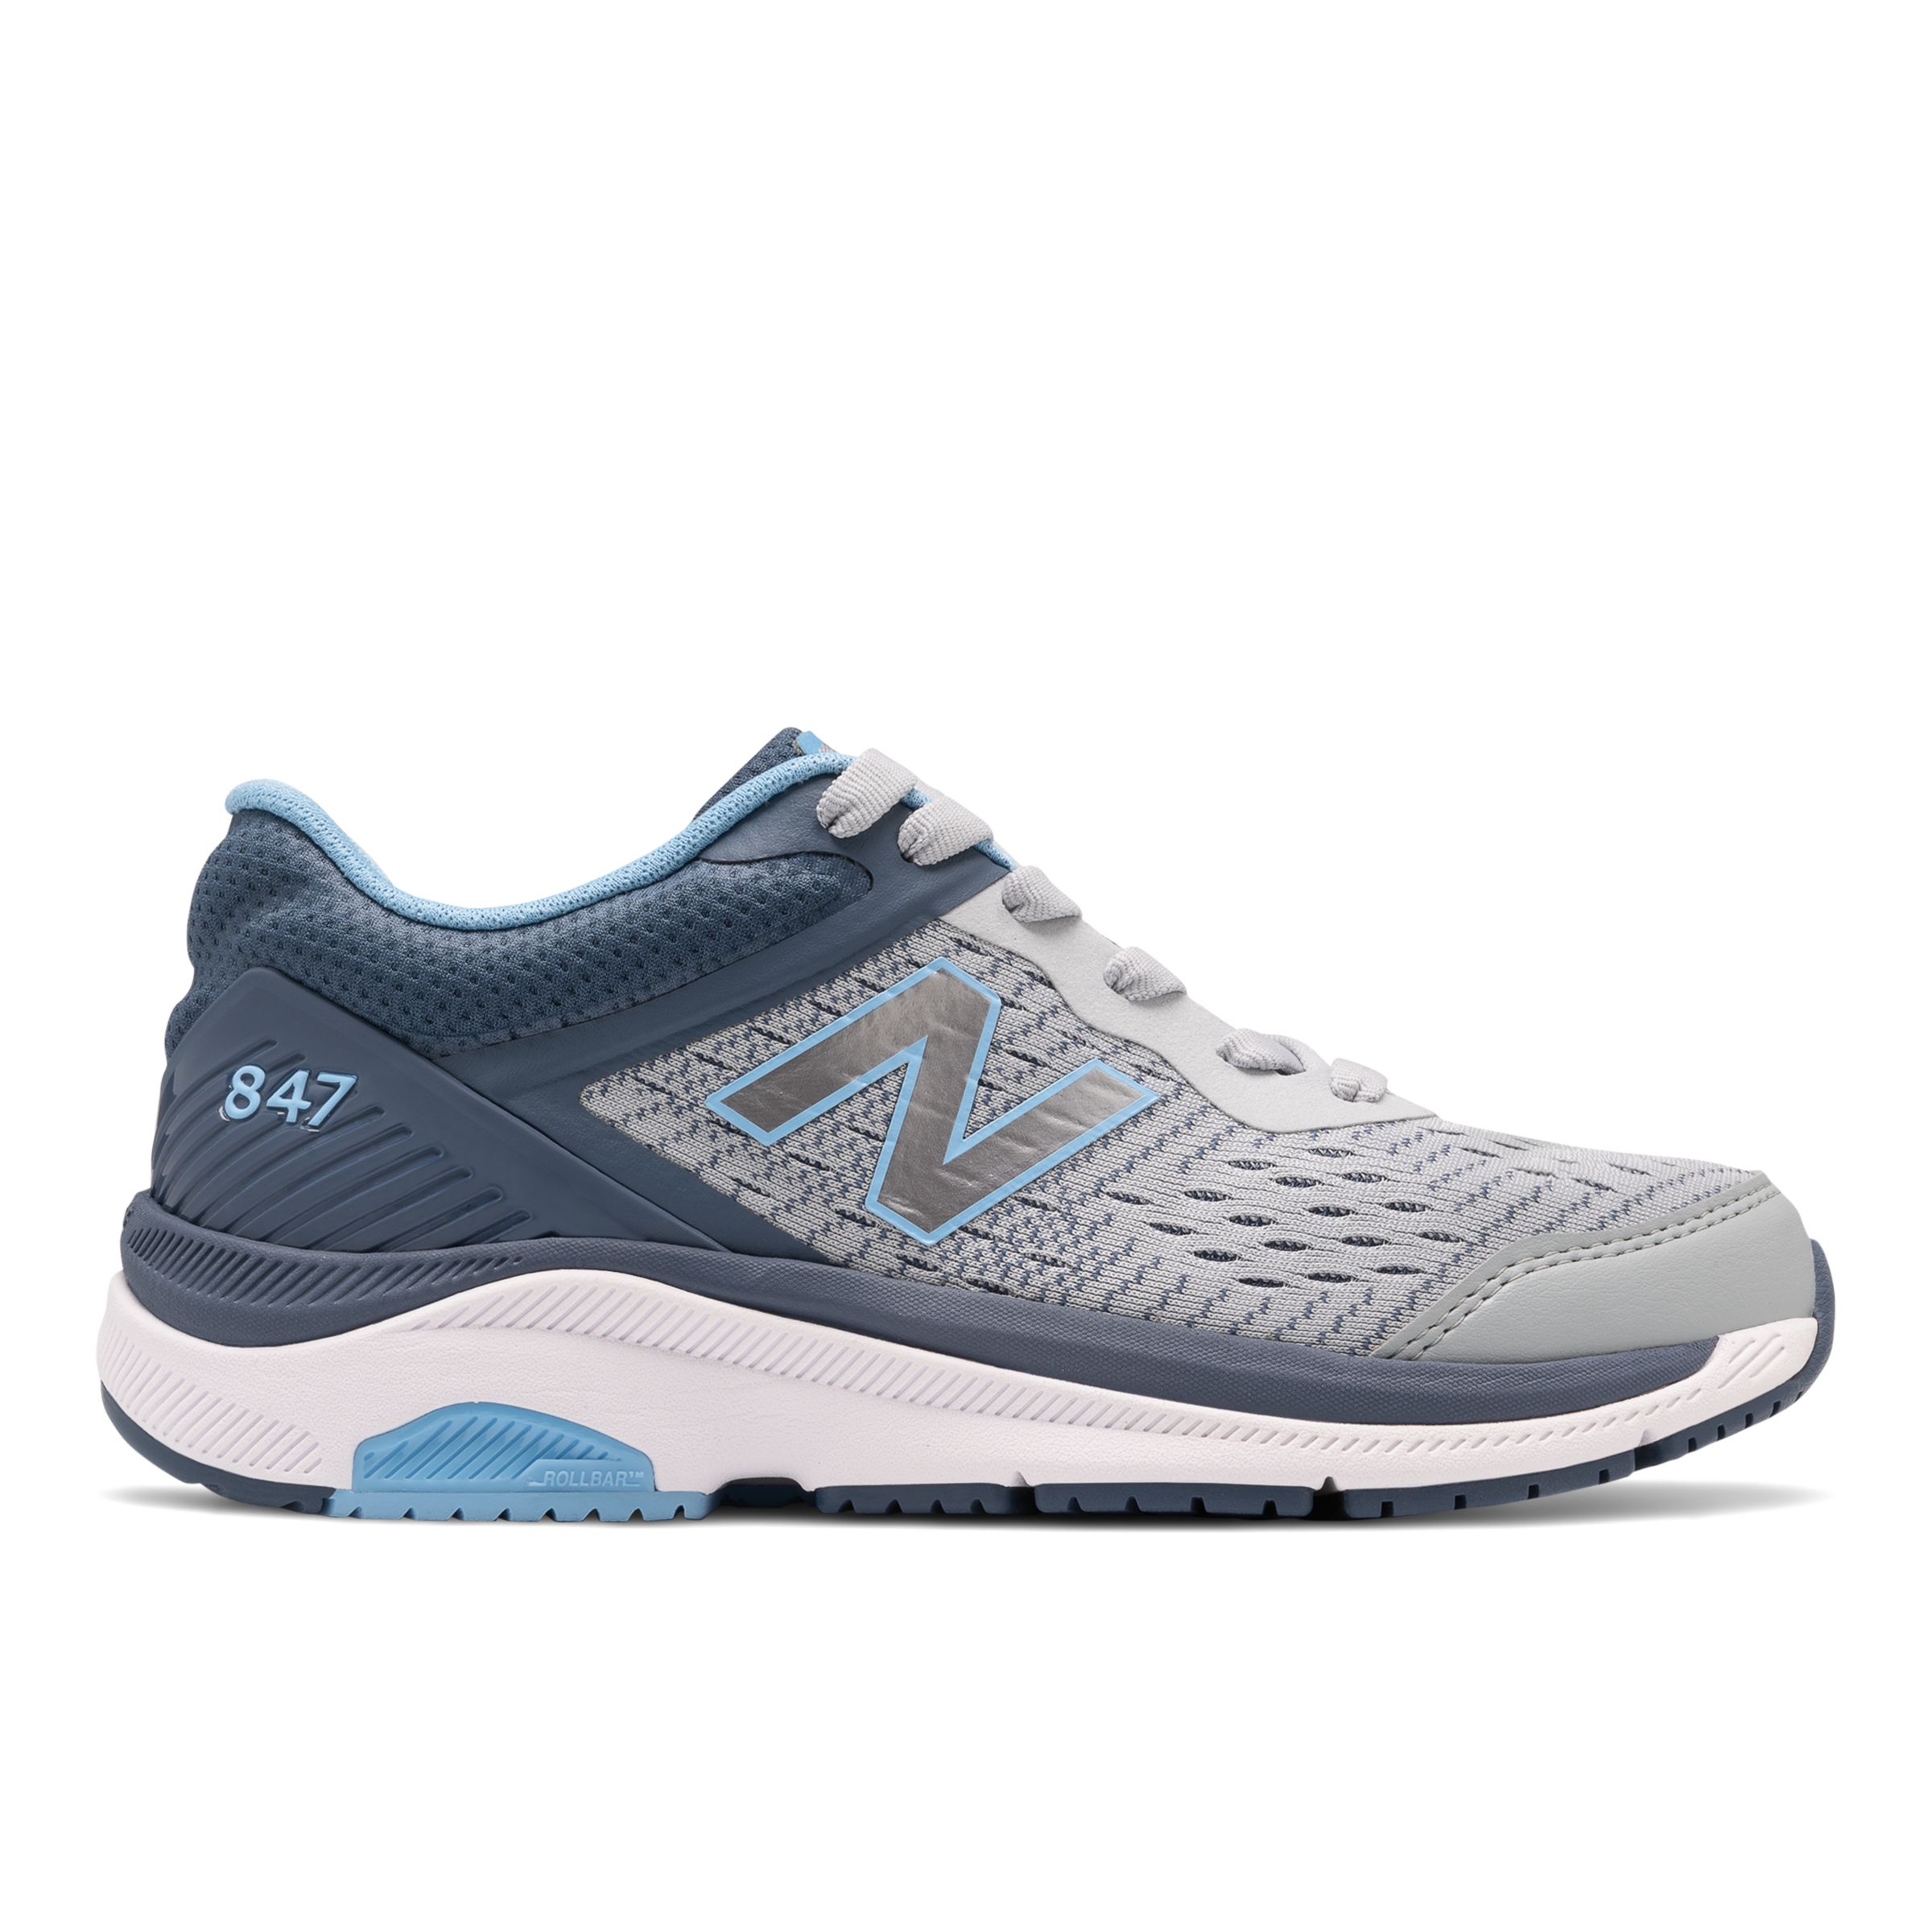 Parity > new balance 511 womens, Up to 66% OFF